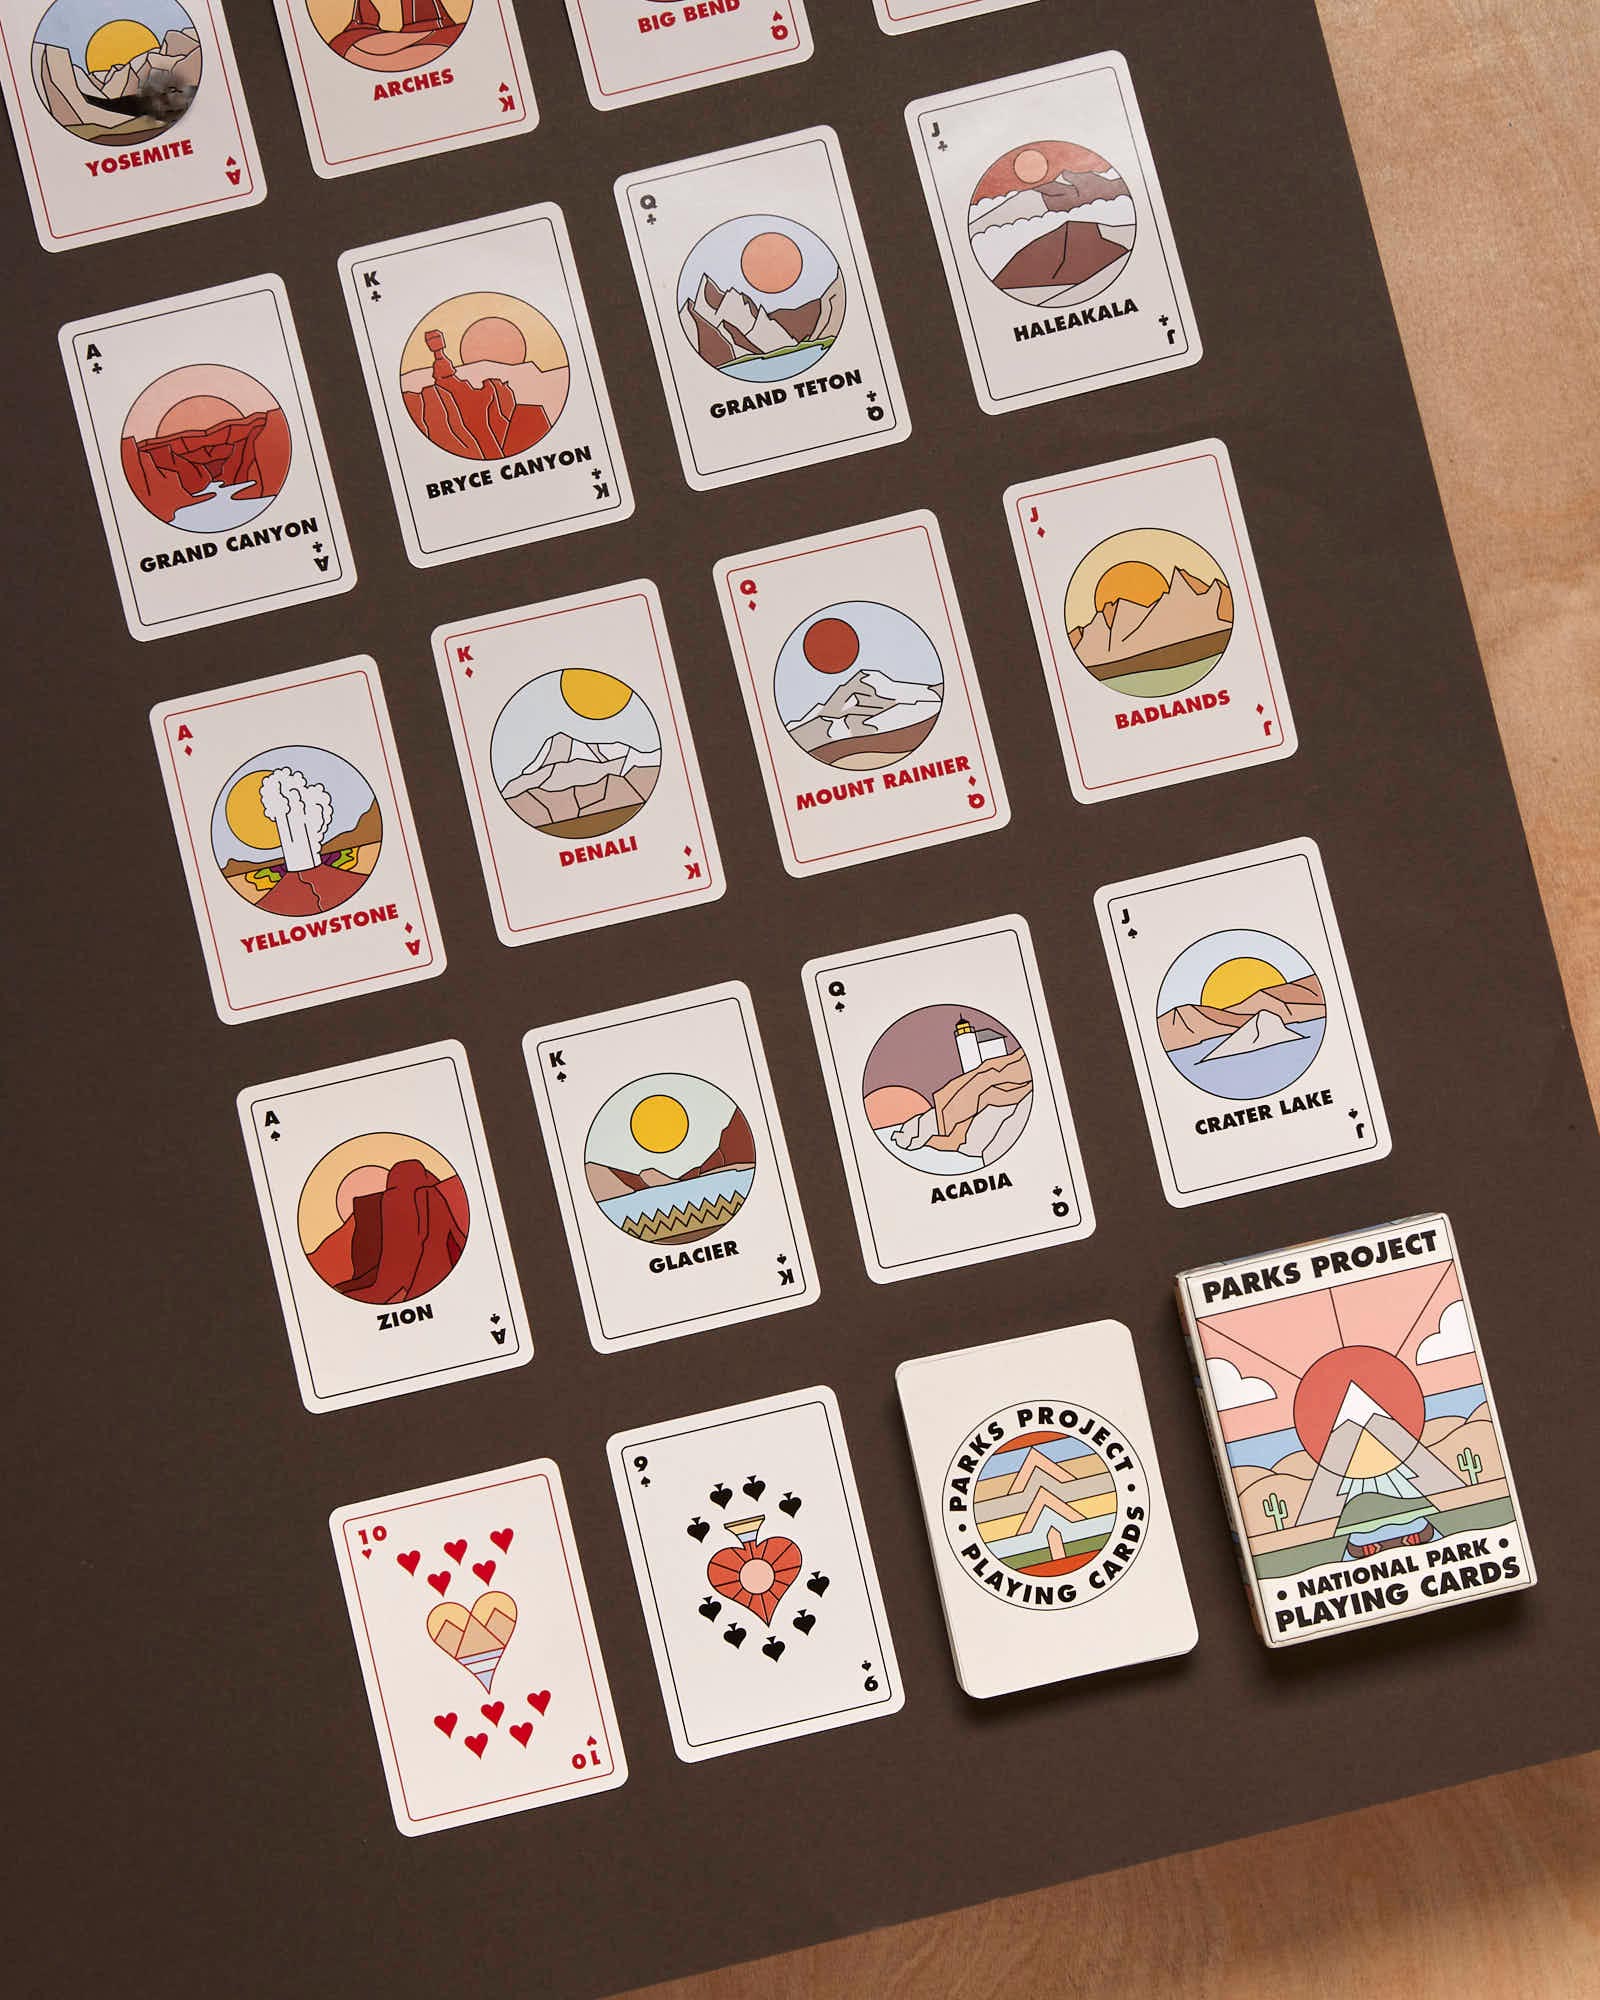 Sustainable Forest Paper National Park Playing Cards | Keep Nature Wild